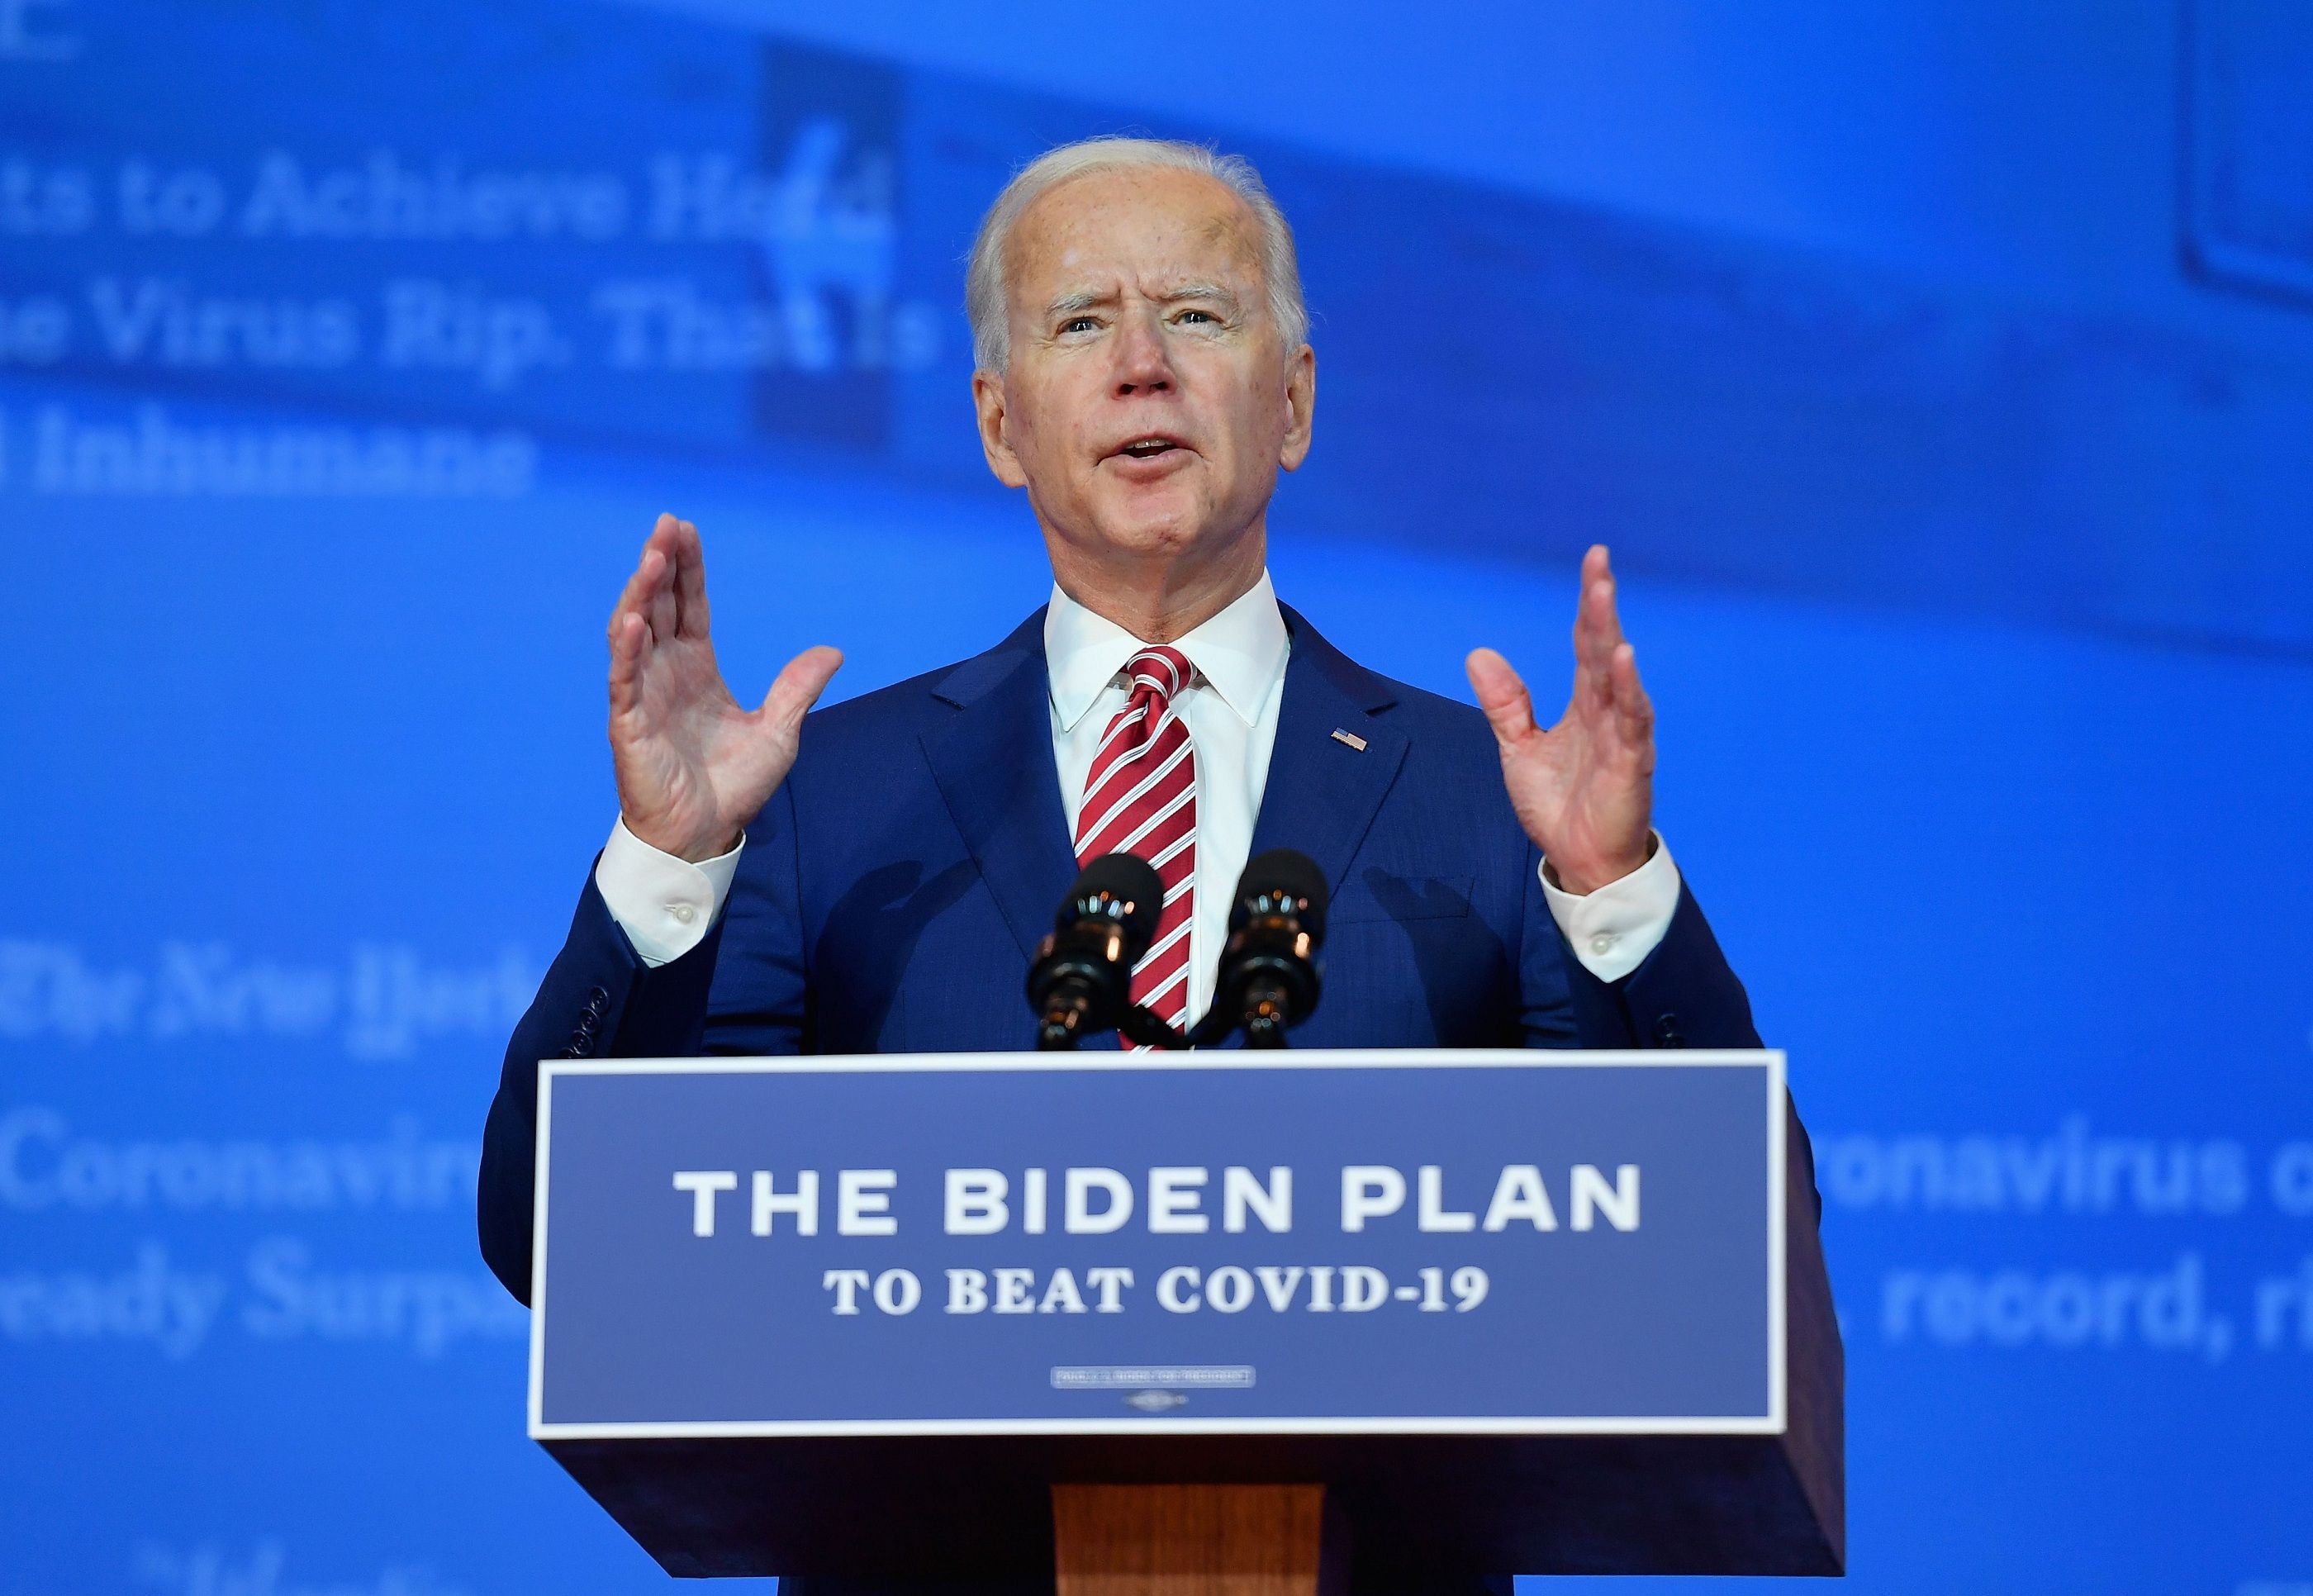 U.S. President-elect Joe Biden delivers remarks on COVID-19. Image by Stratos Brilakis / Shutterstock. United States, 2020.